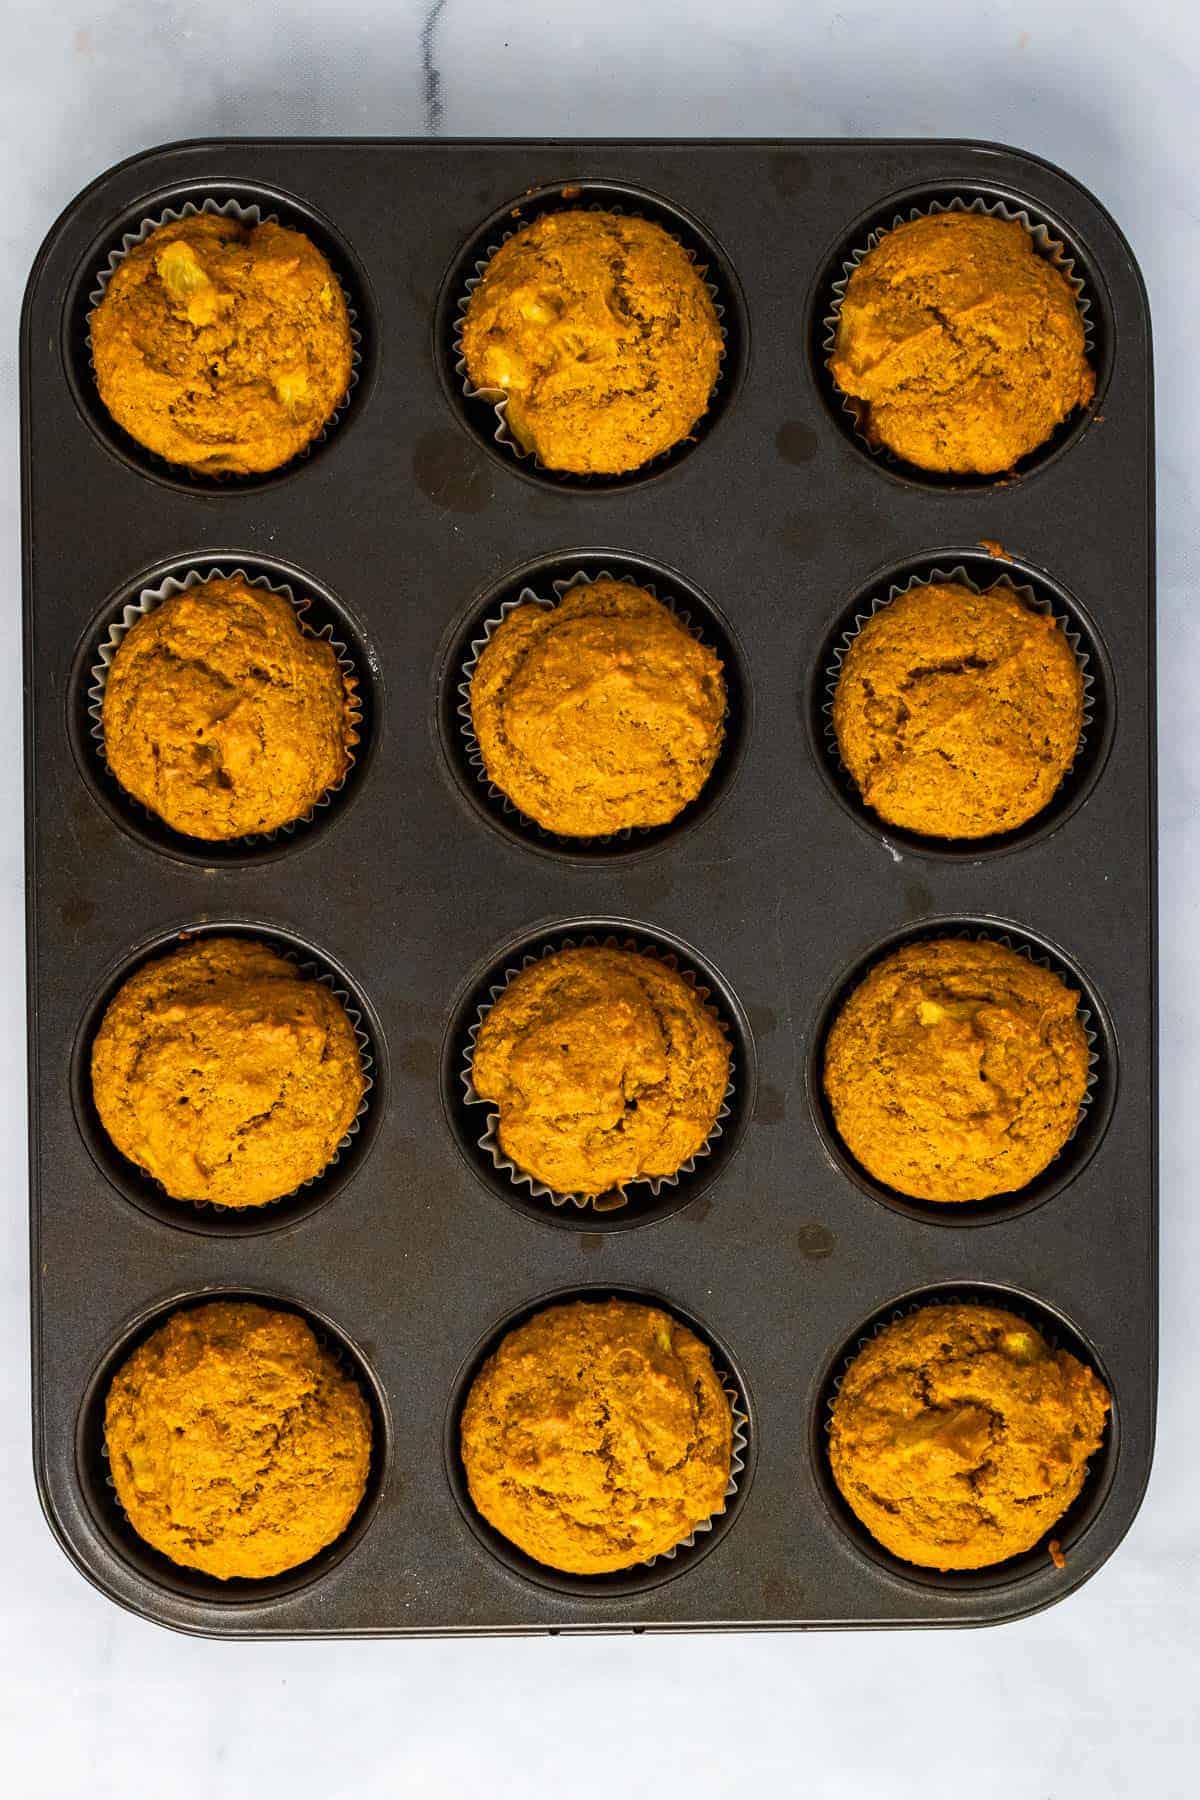 Muffins finished baking and still in the muffin tray, as seen from above